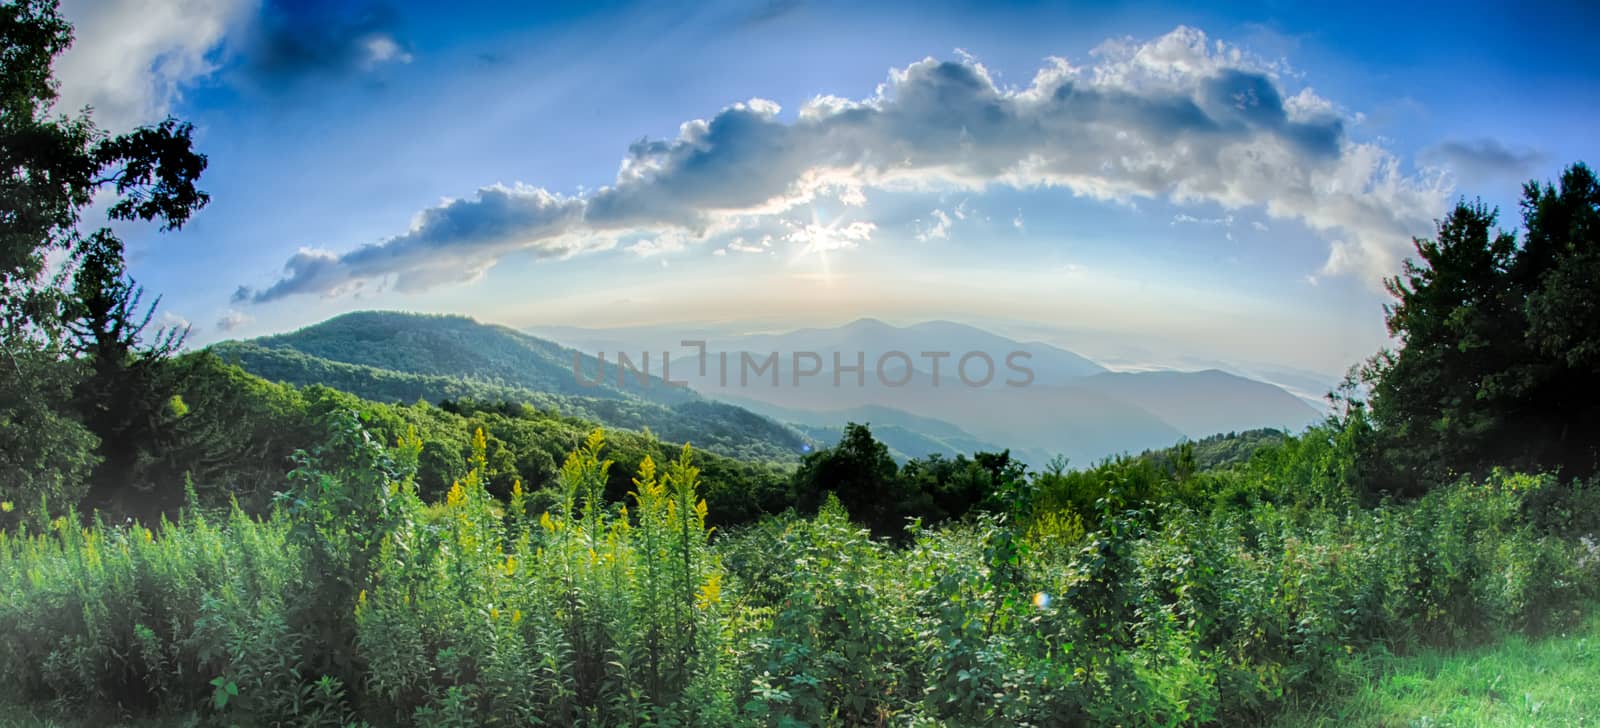 Sunrise over Blue Ridge Mountains Scenic Overlook  by digidreamgrafix